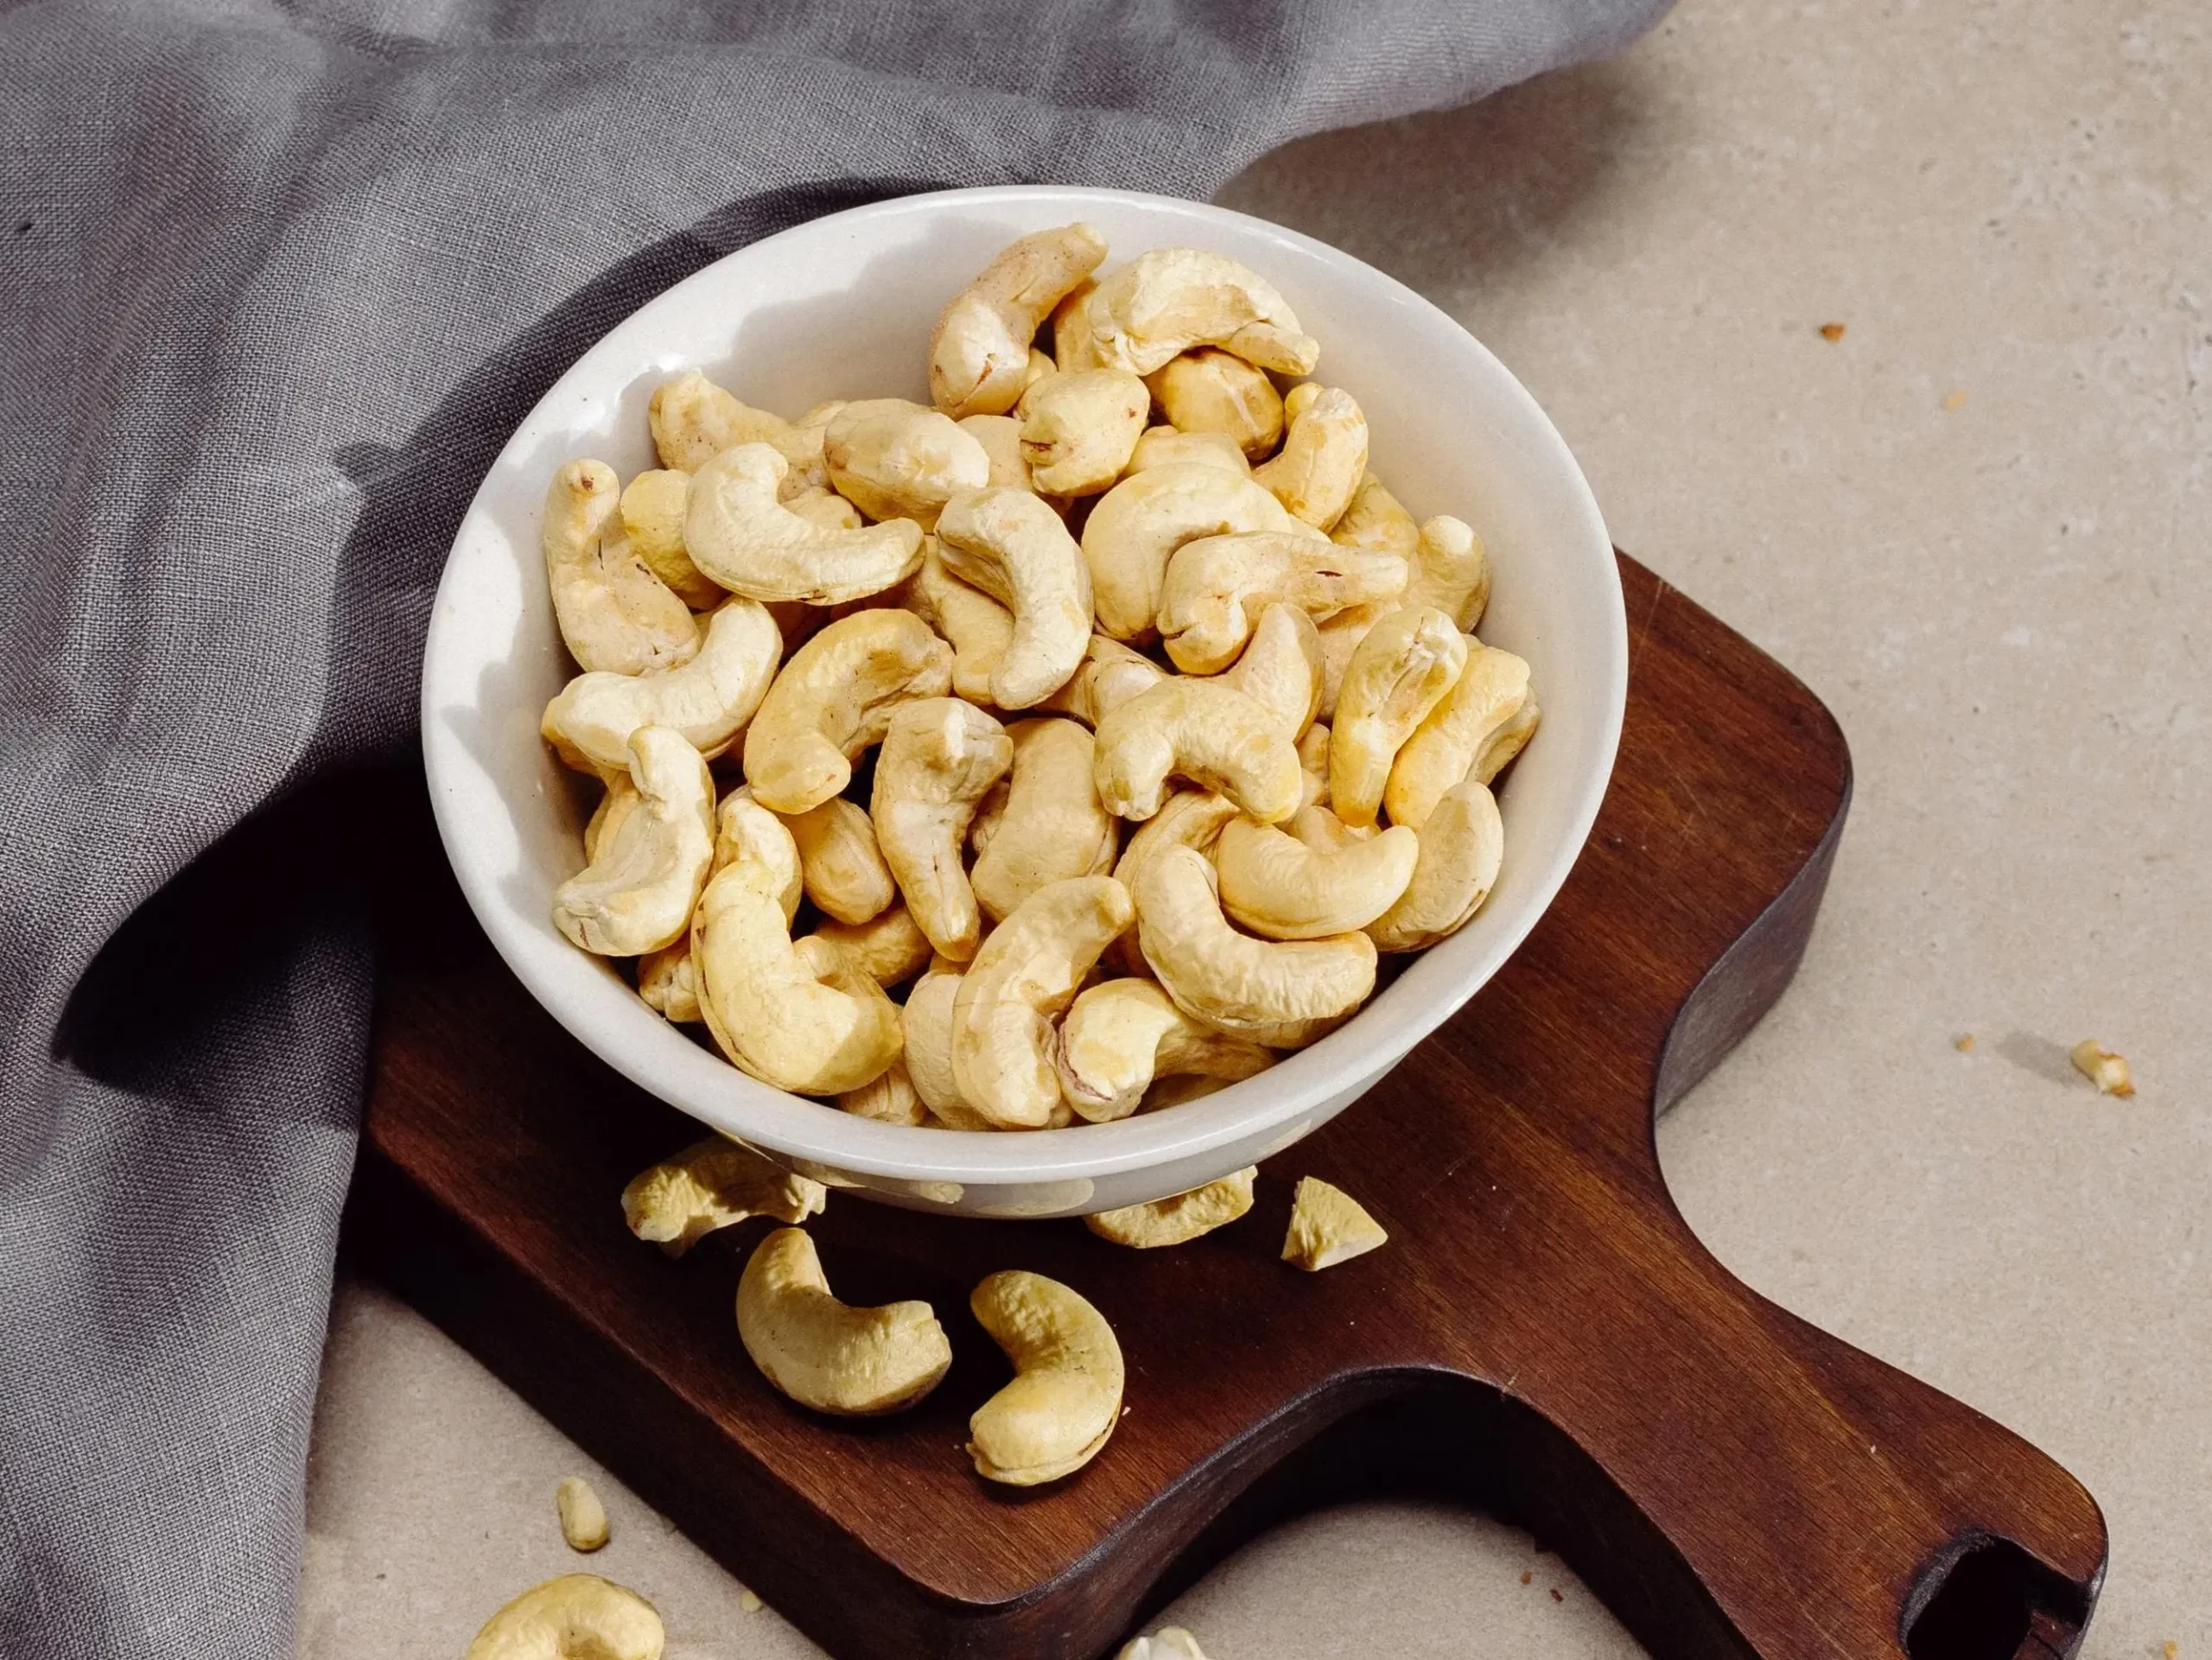 Is It Safe To Eat Cashews For Your Cats?